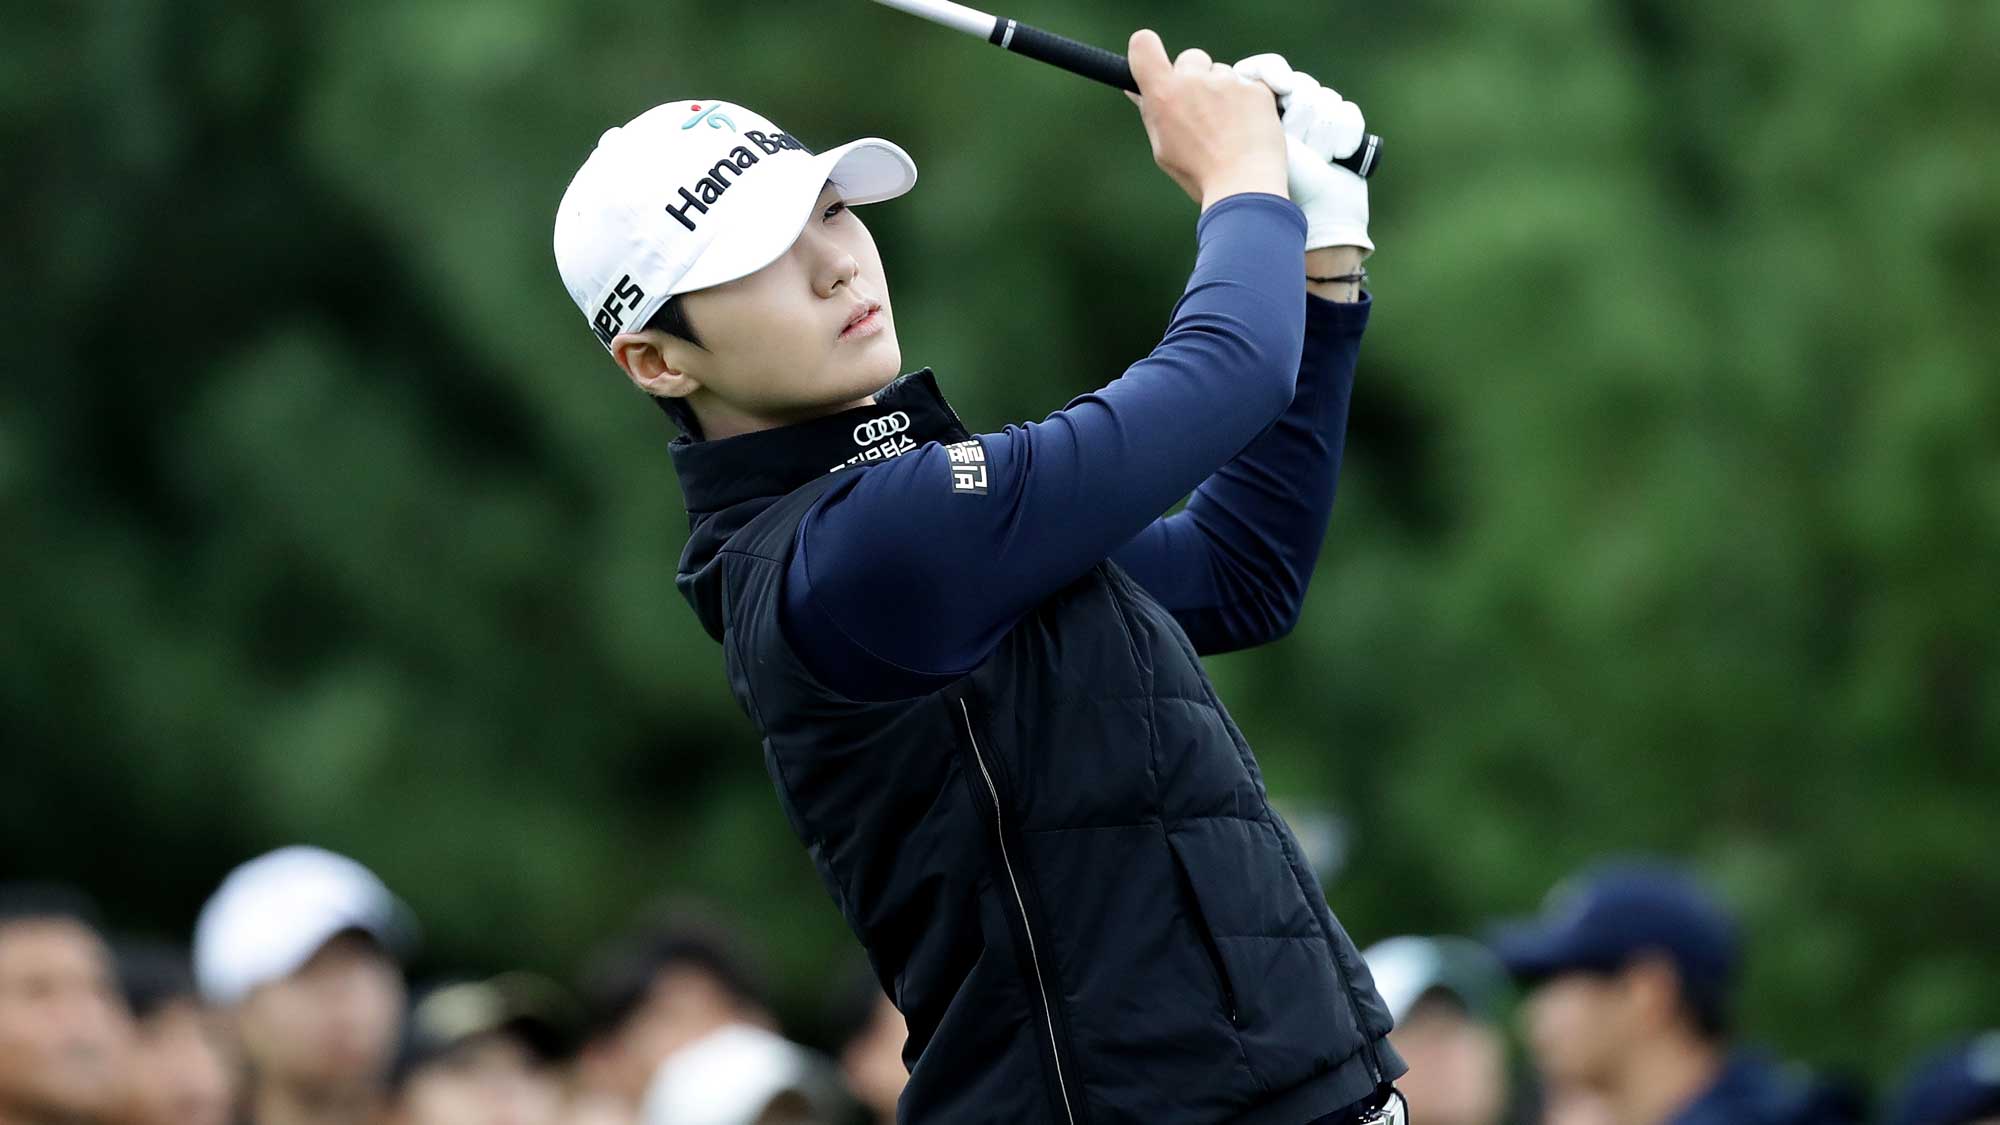 Sung-Hyun Park of South Korea plays a tee shot on the 2nd hole during the first round of the LPGA KEB Hana Bank Championship